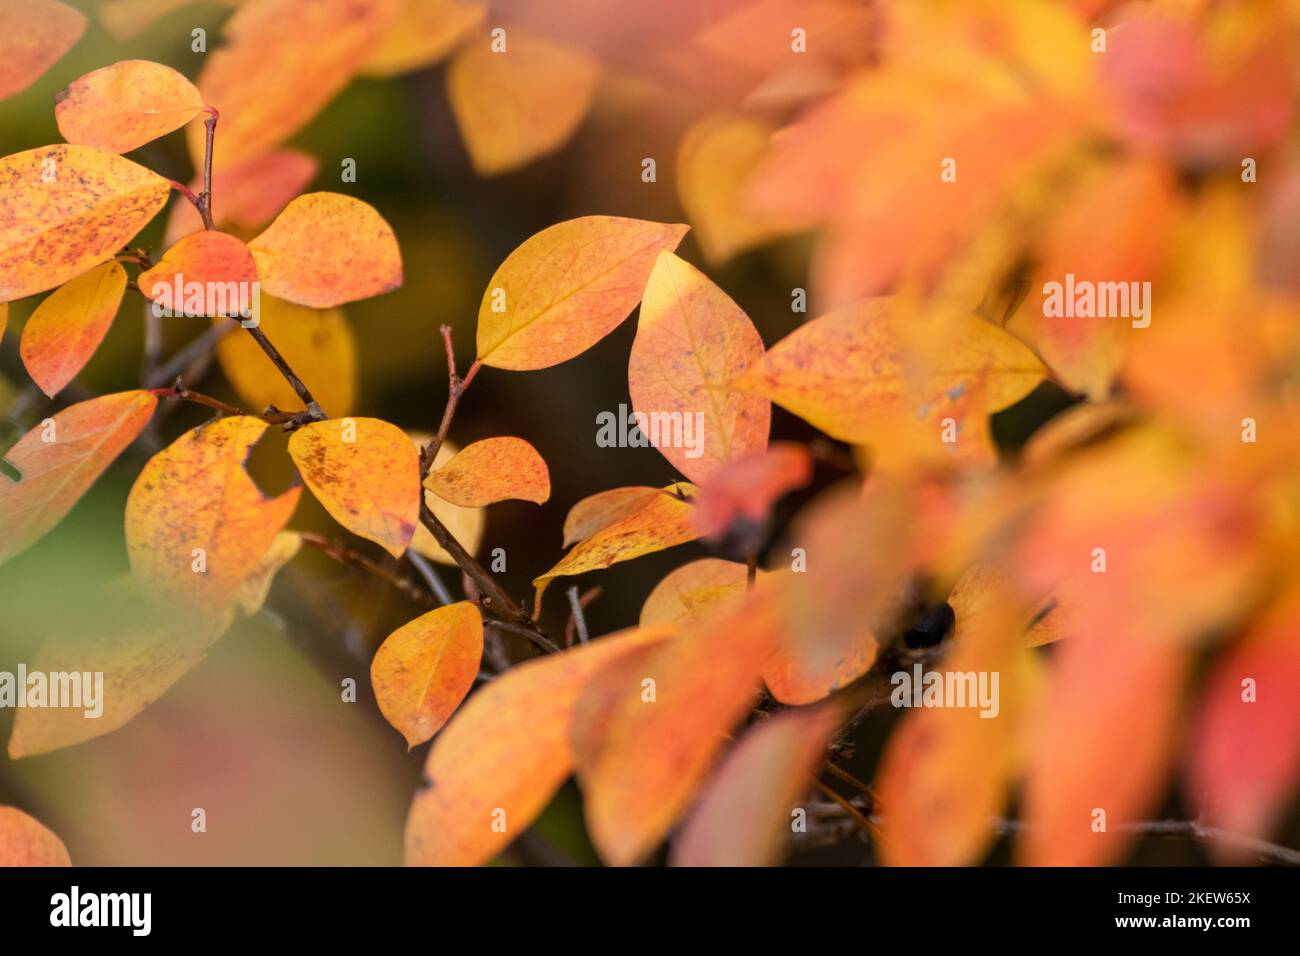 Autumn yellow and red vibrant leaves branches close-up with blurred background. Autumnal forest in orange and yellow colors, nature details Stock Photo